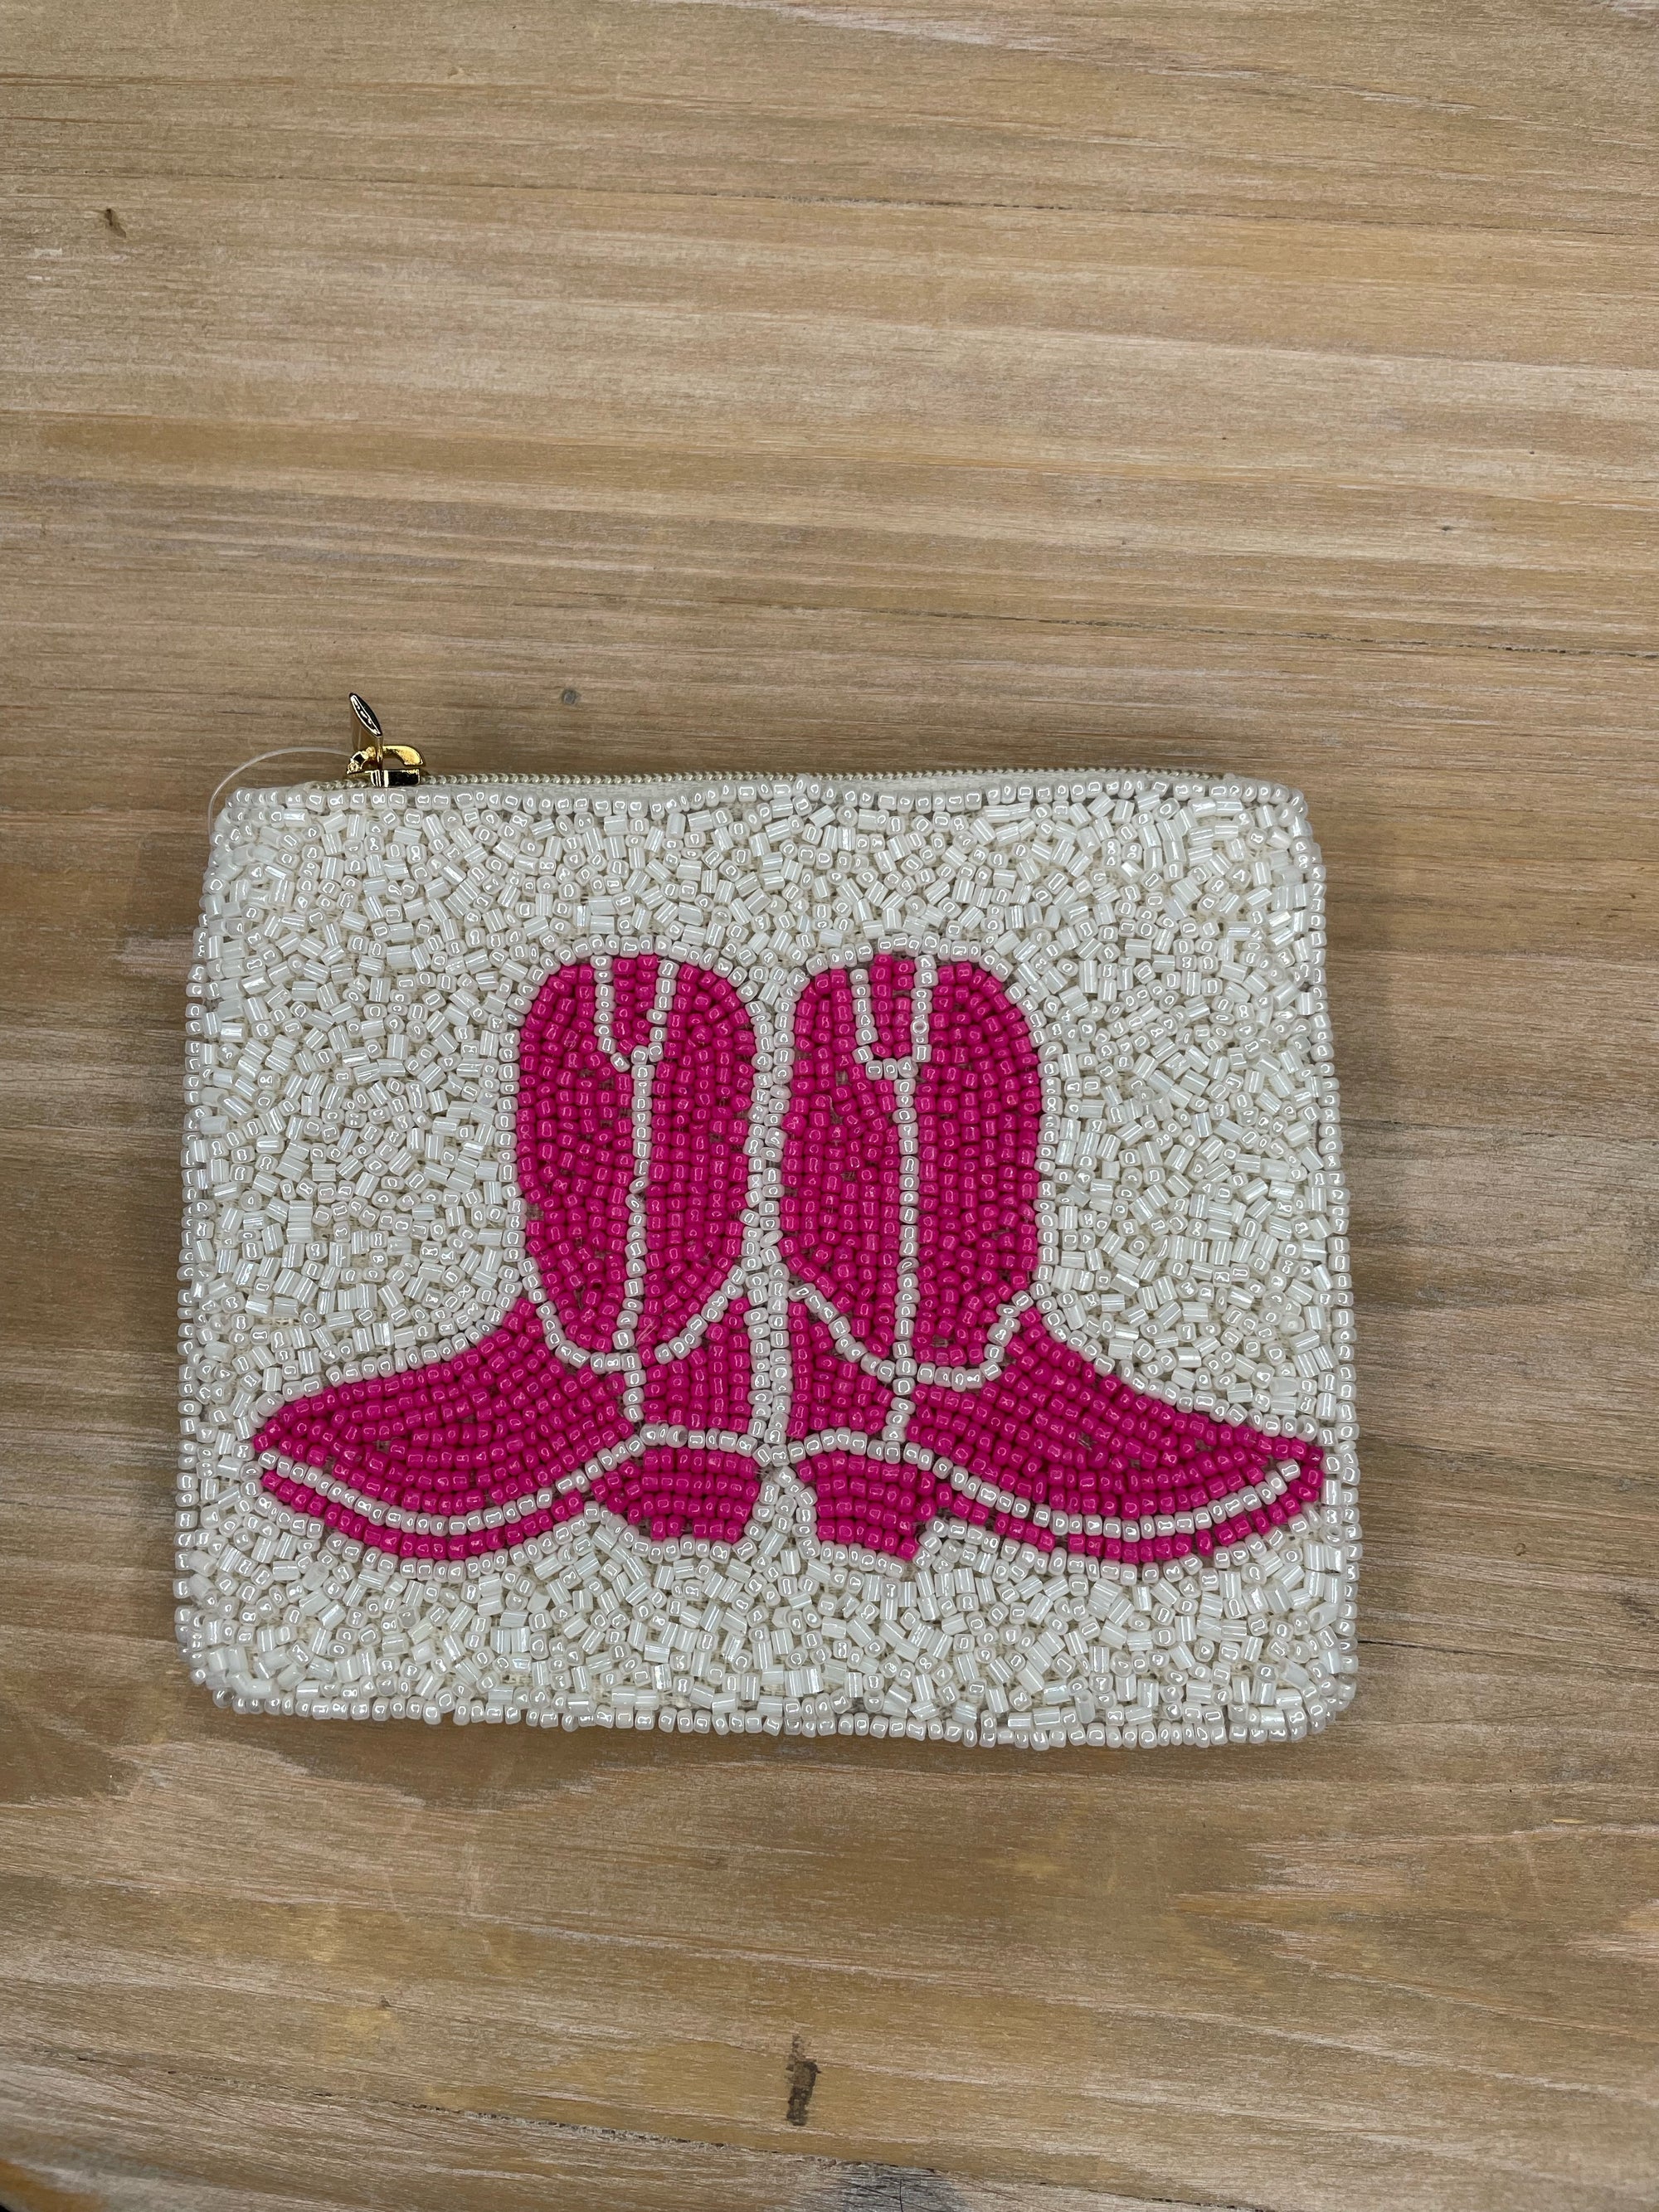 Beaded "Pink Cowboy Boots" Coin Purse